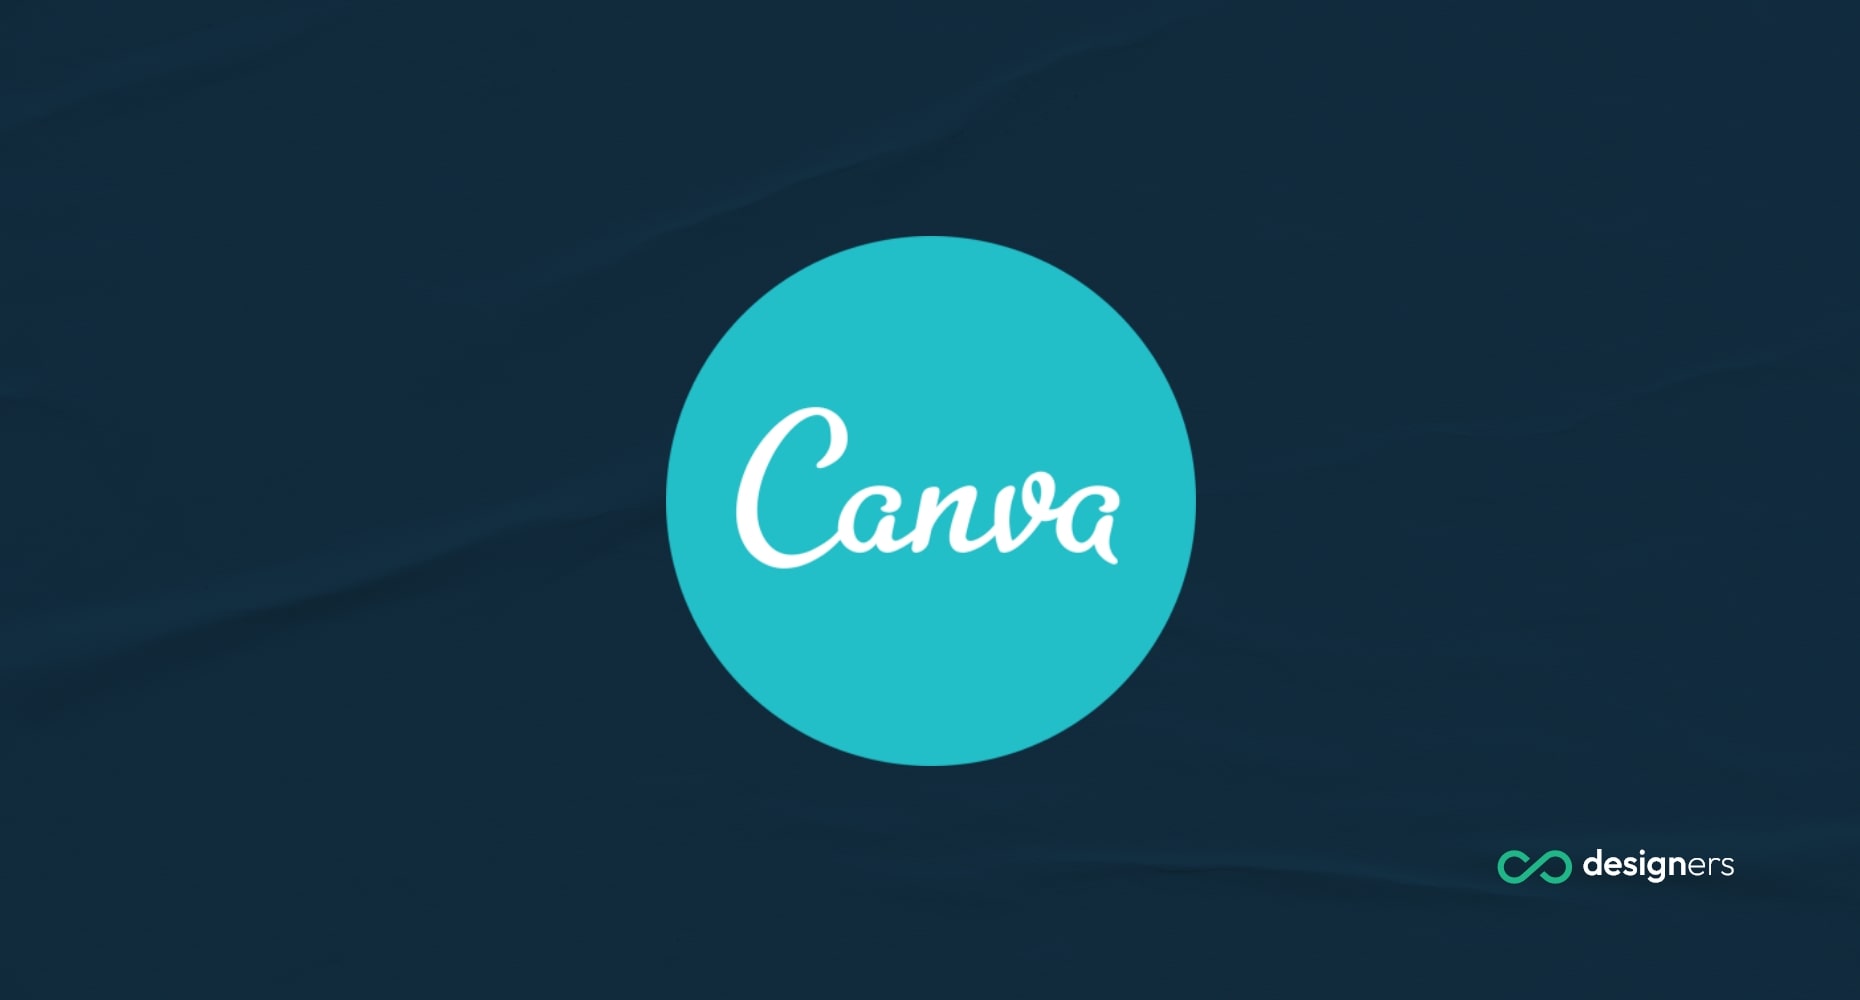 How to download bigger resolution size files on canva free plan? 